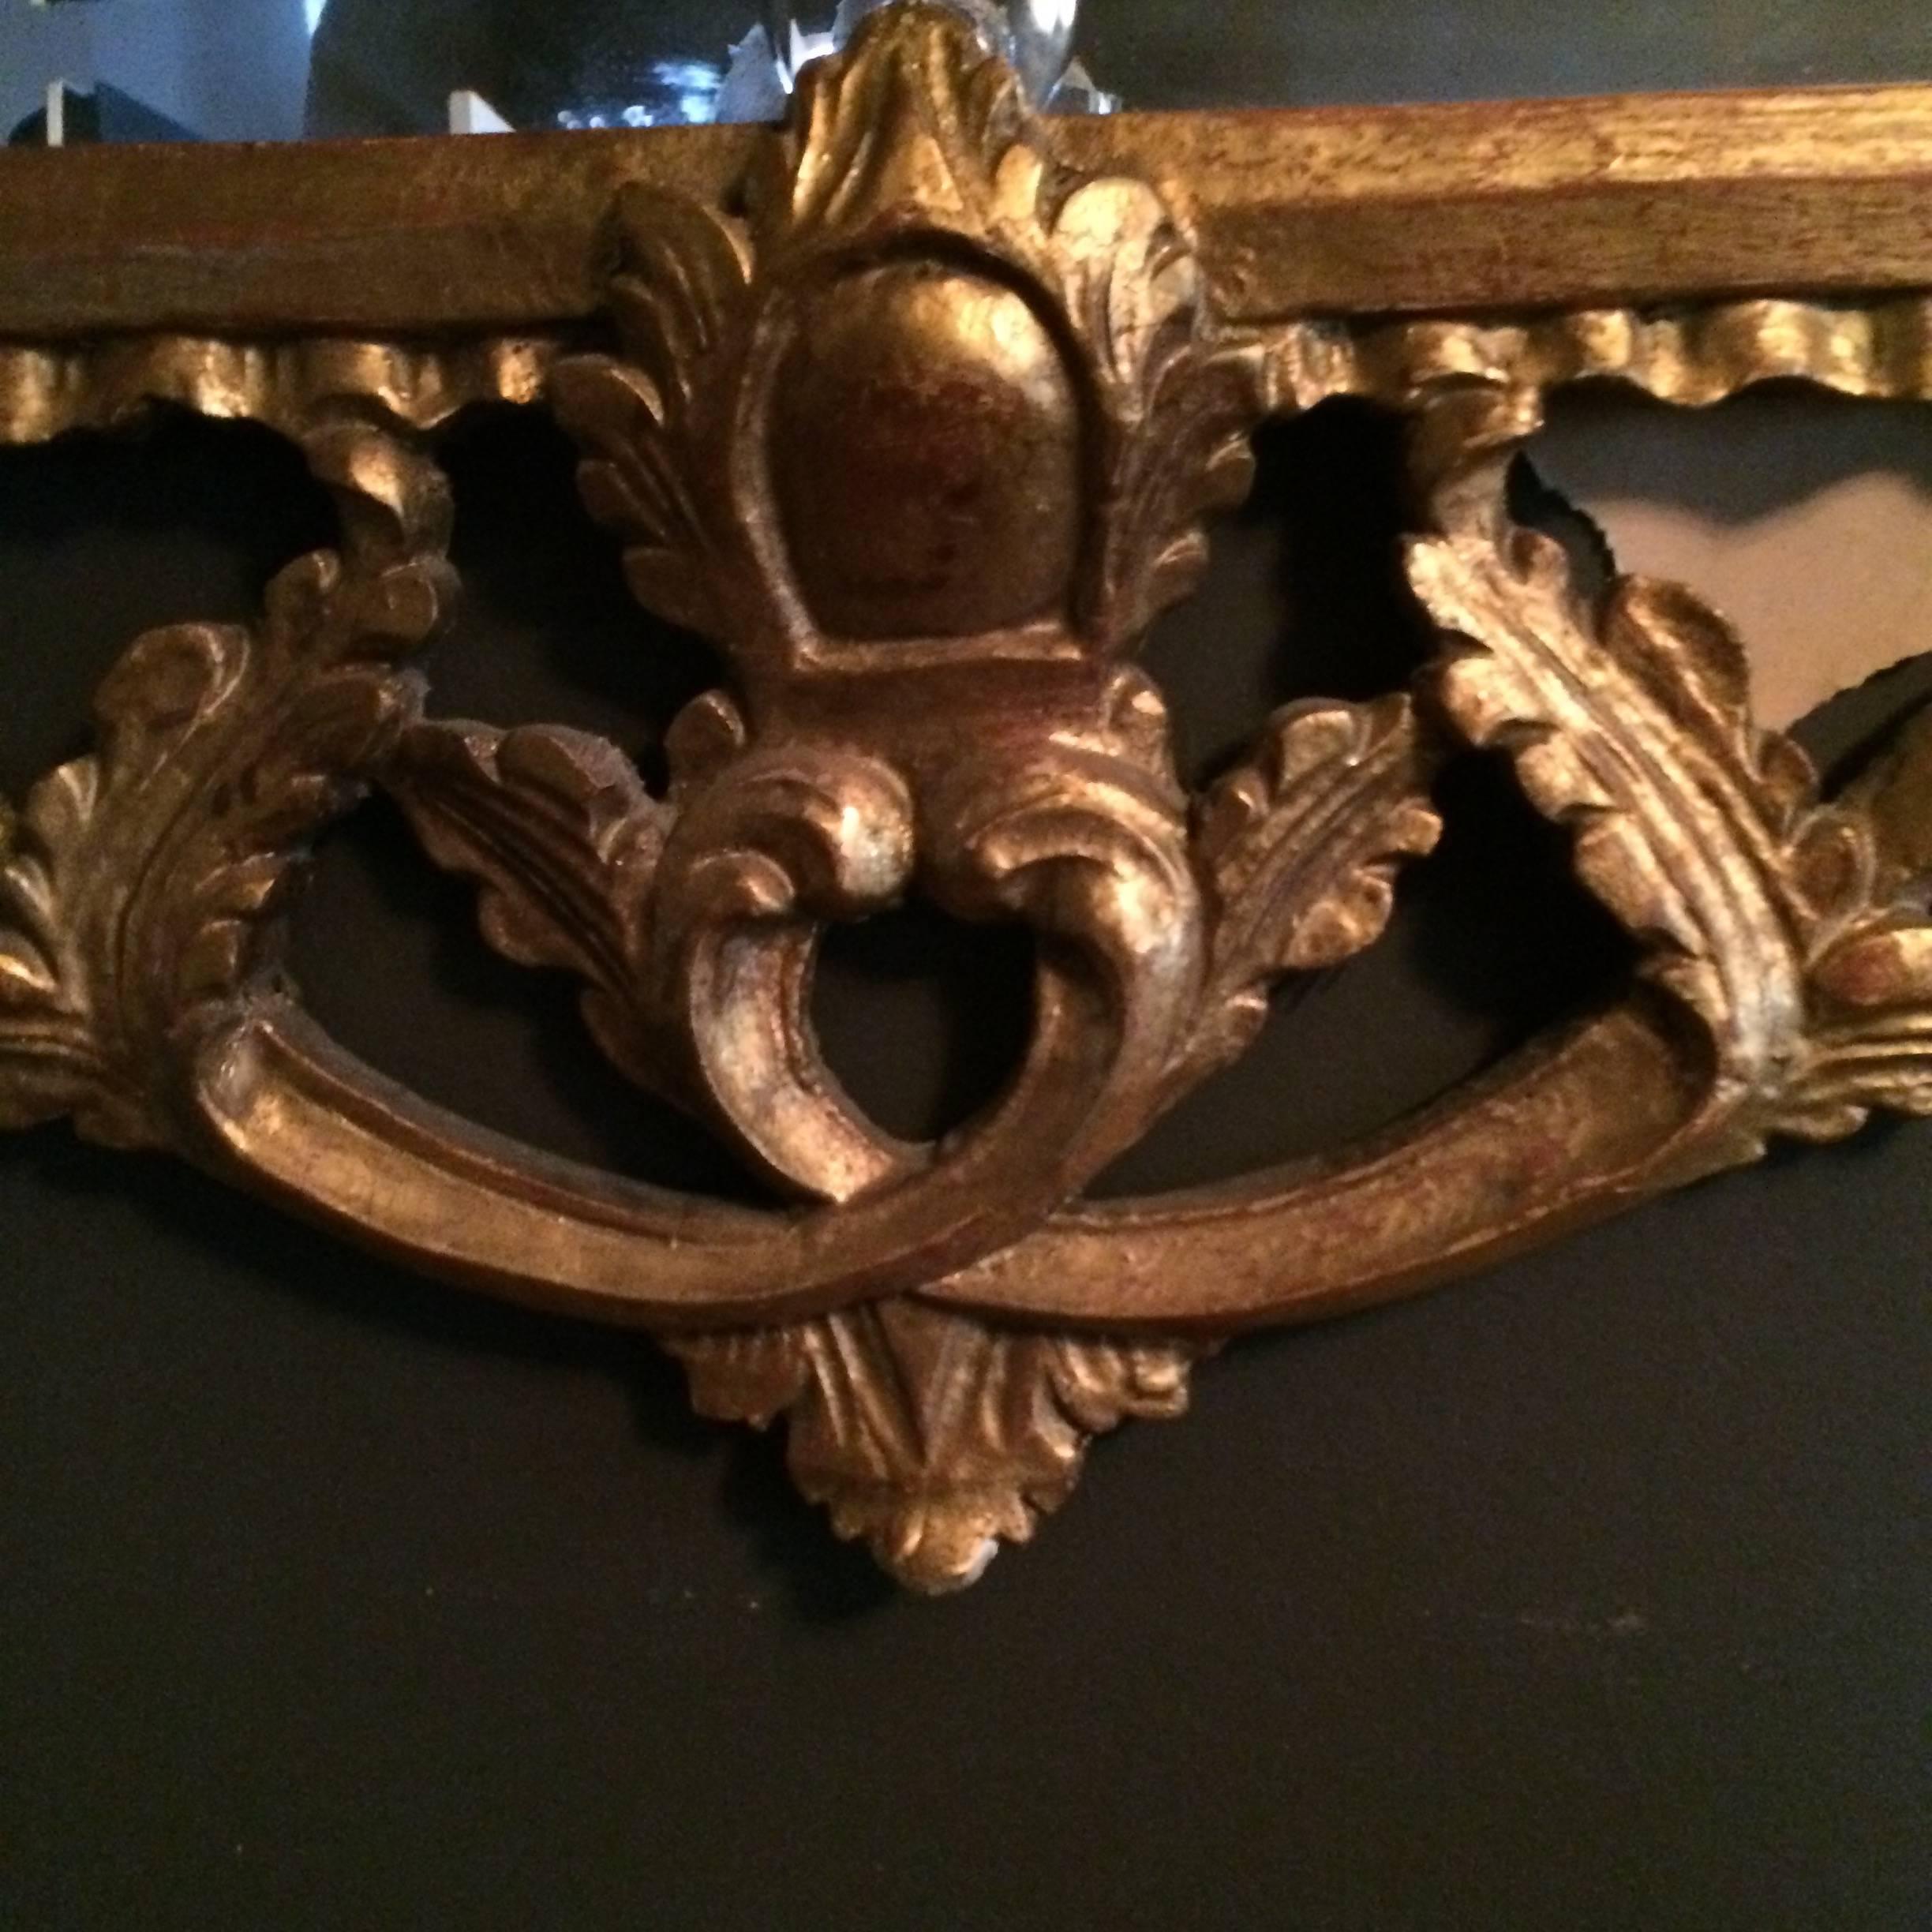 An impressive hand-carved mirror in giltwood great detailing and suitable for any room that needs a conversation piece.